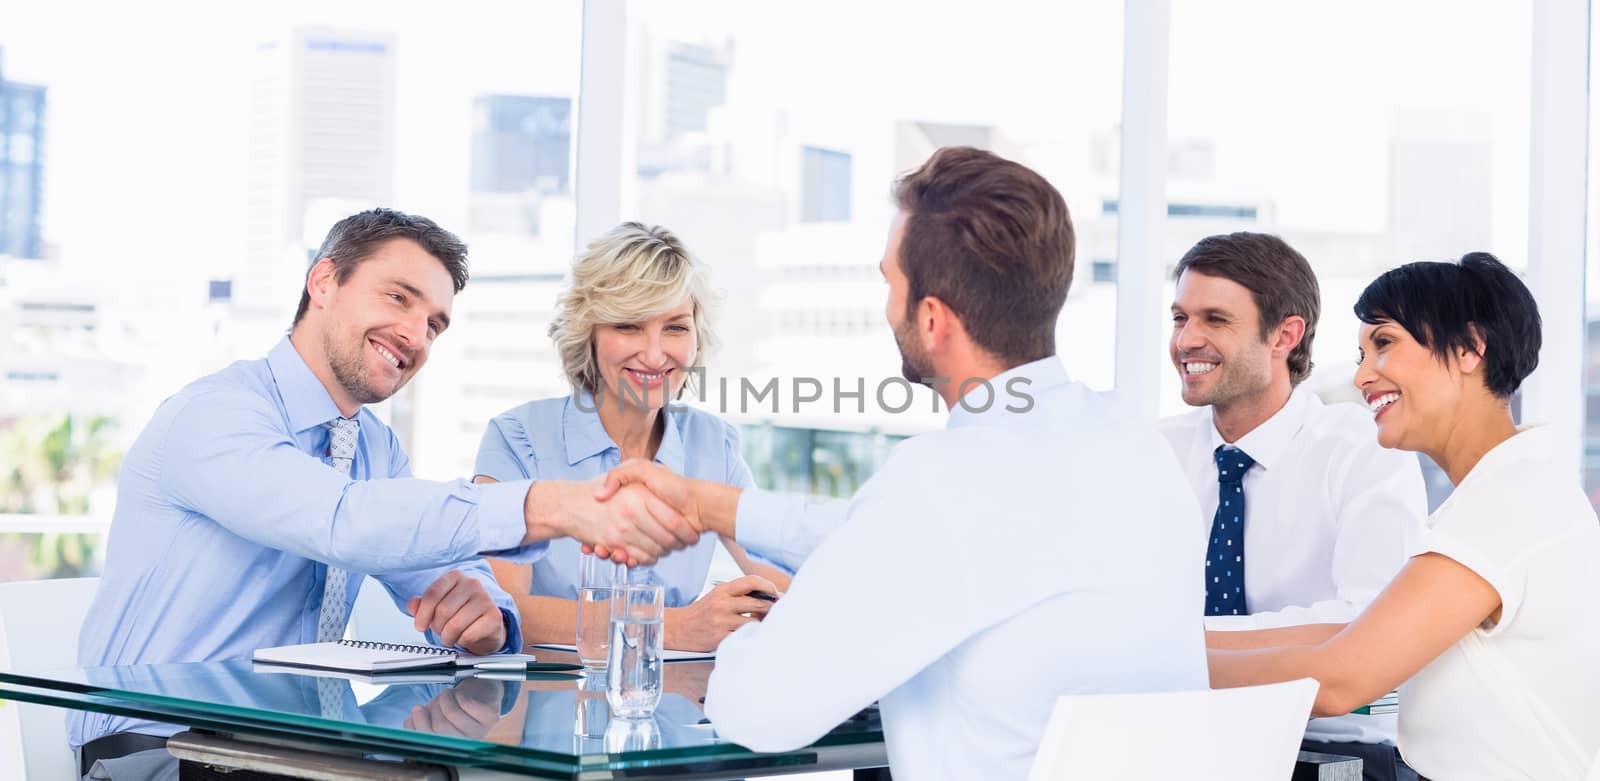 Executives shaking hands during business meeting at office desk